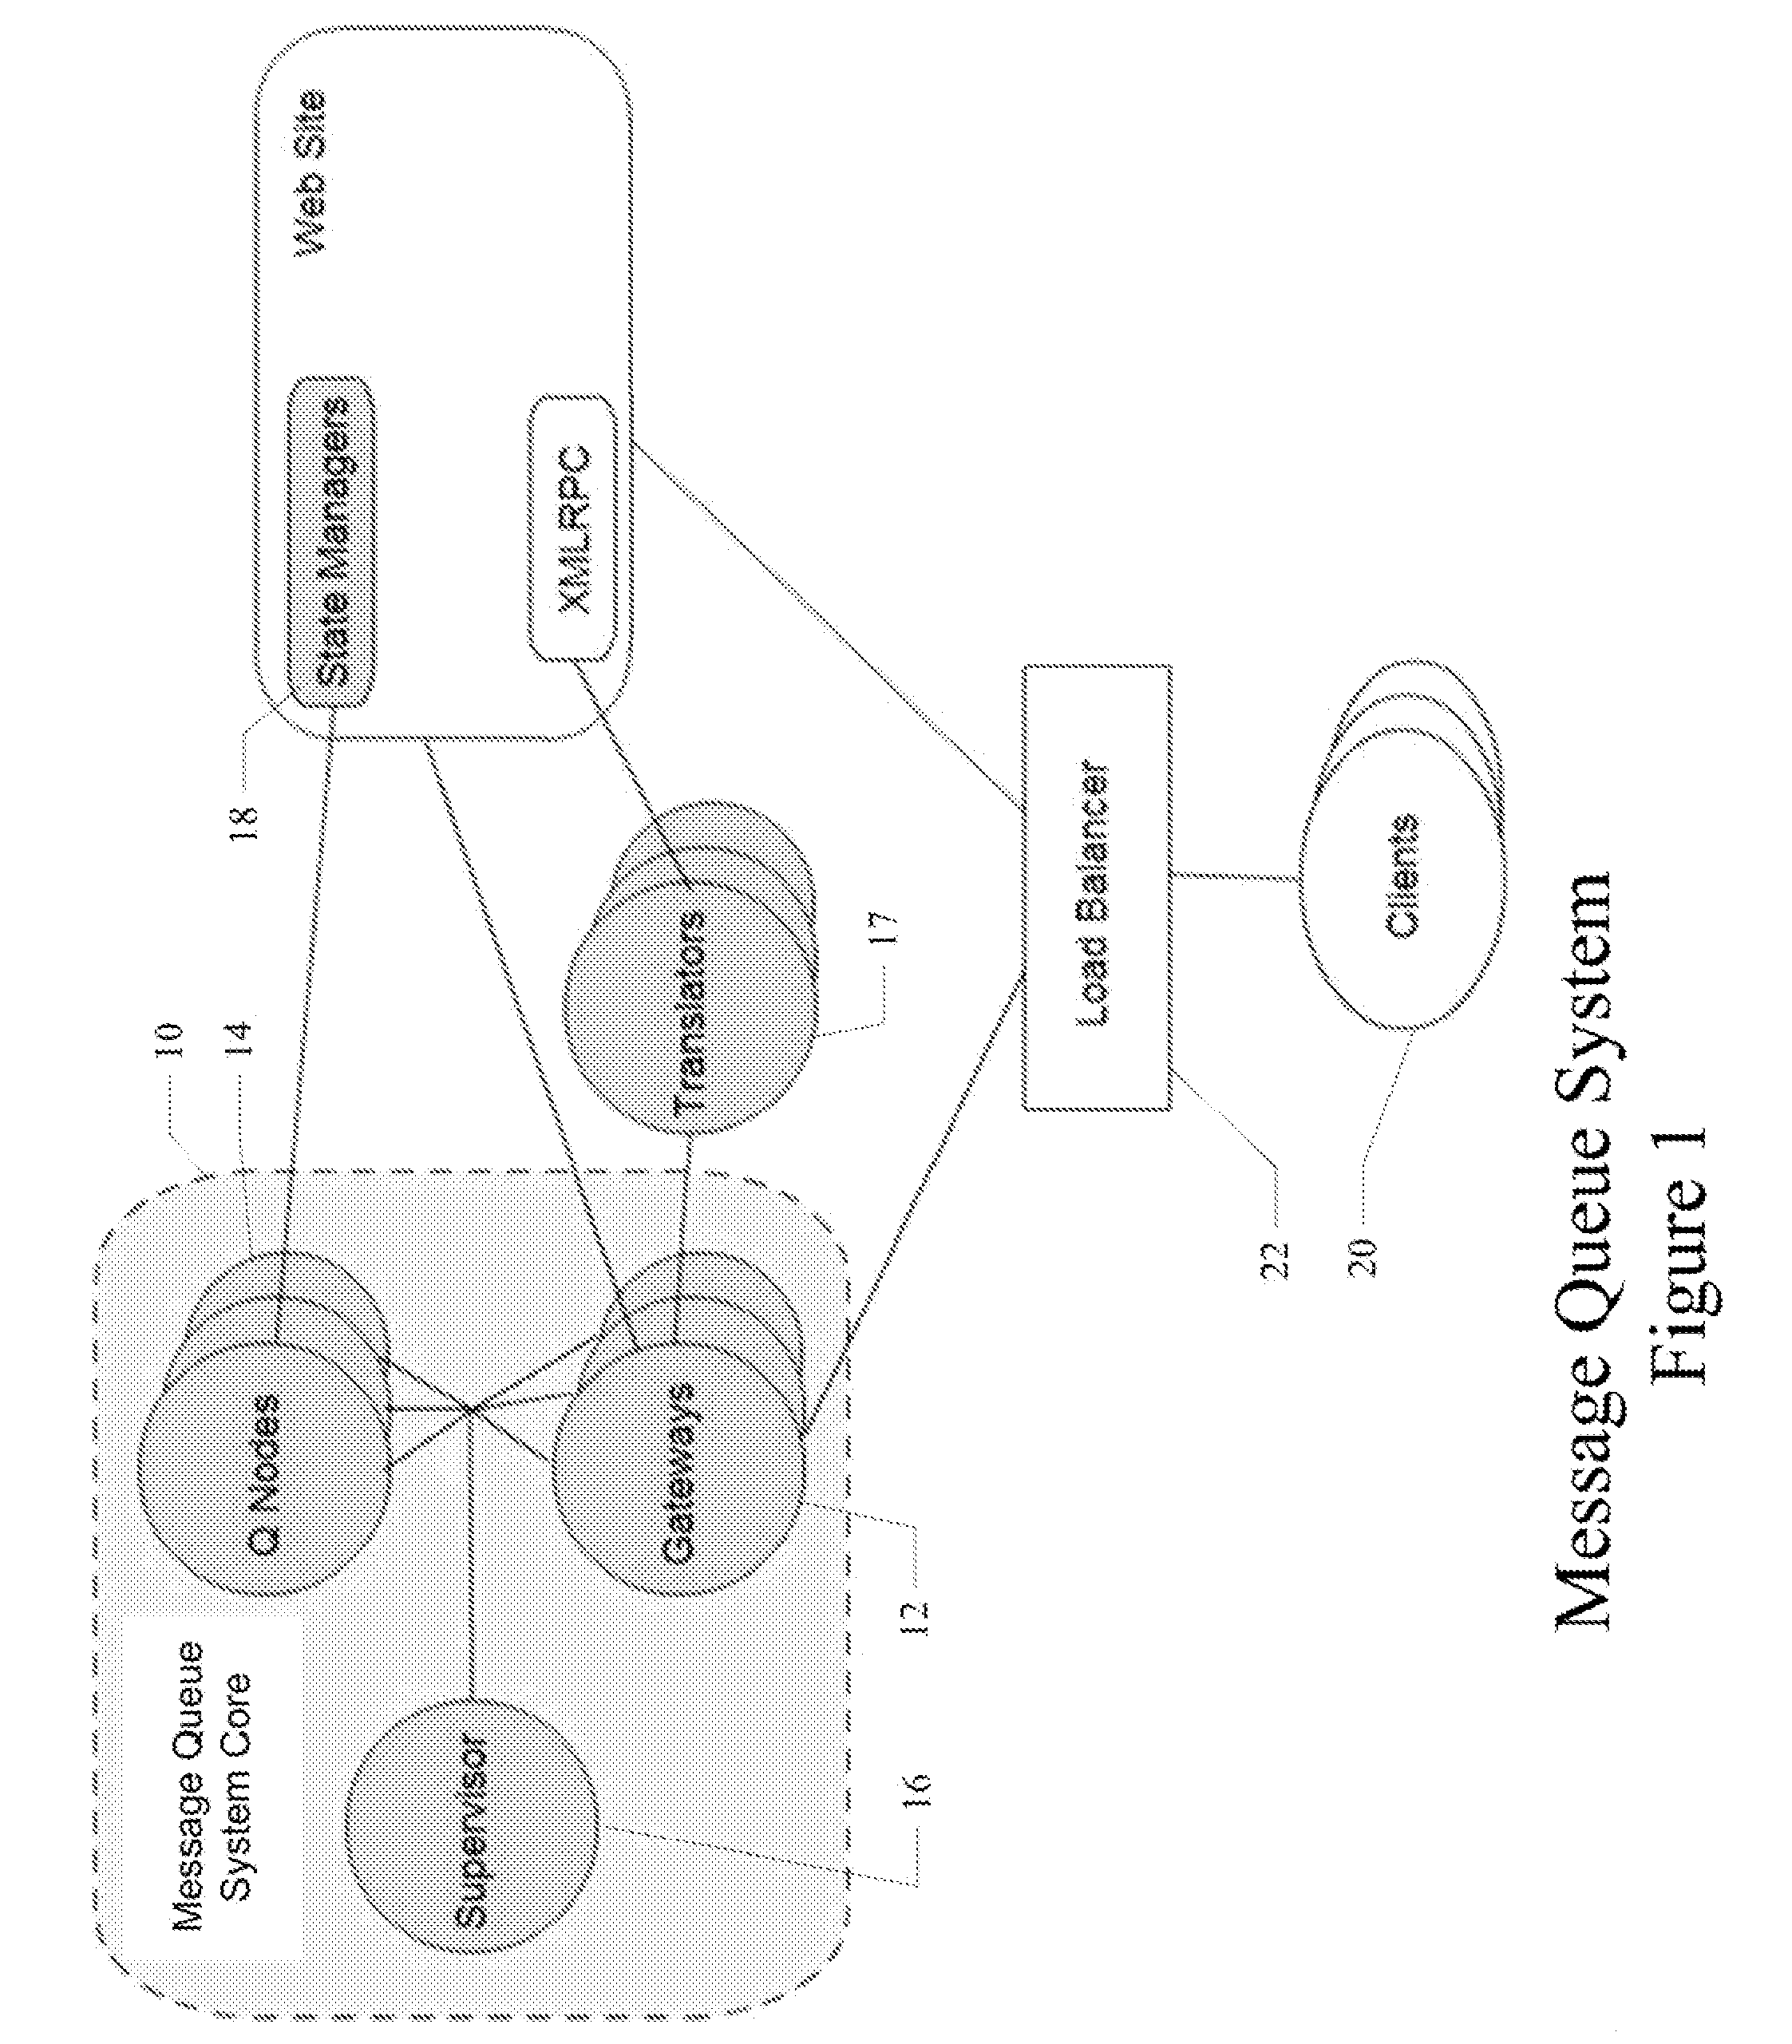 System and method for managing multiple queues of non-persistent messages in a networked environment